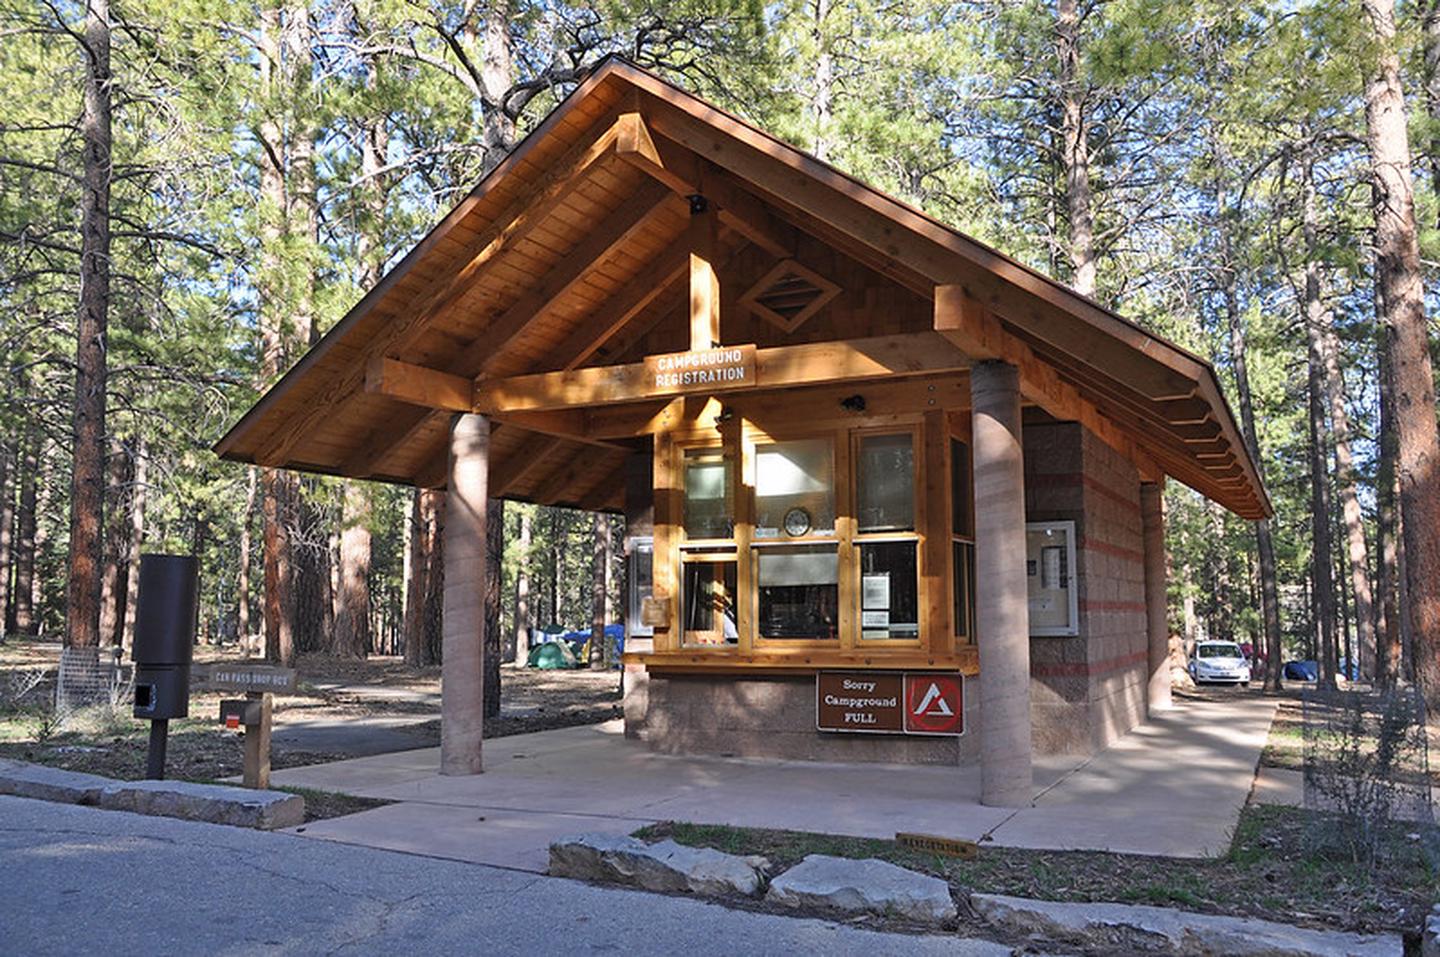 Wooden building with service windowsCampers can ask questions and check in for their campsite at the Campground Registration Kiosk